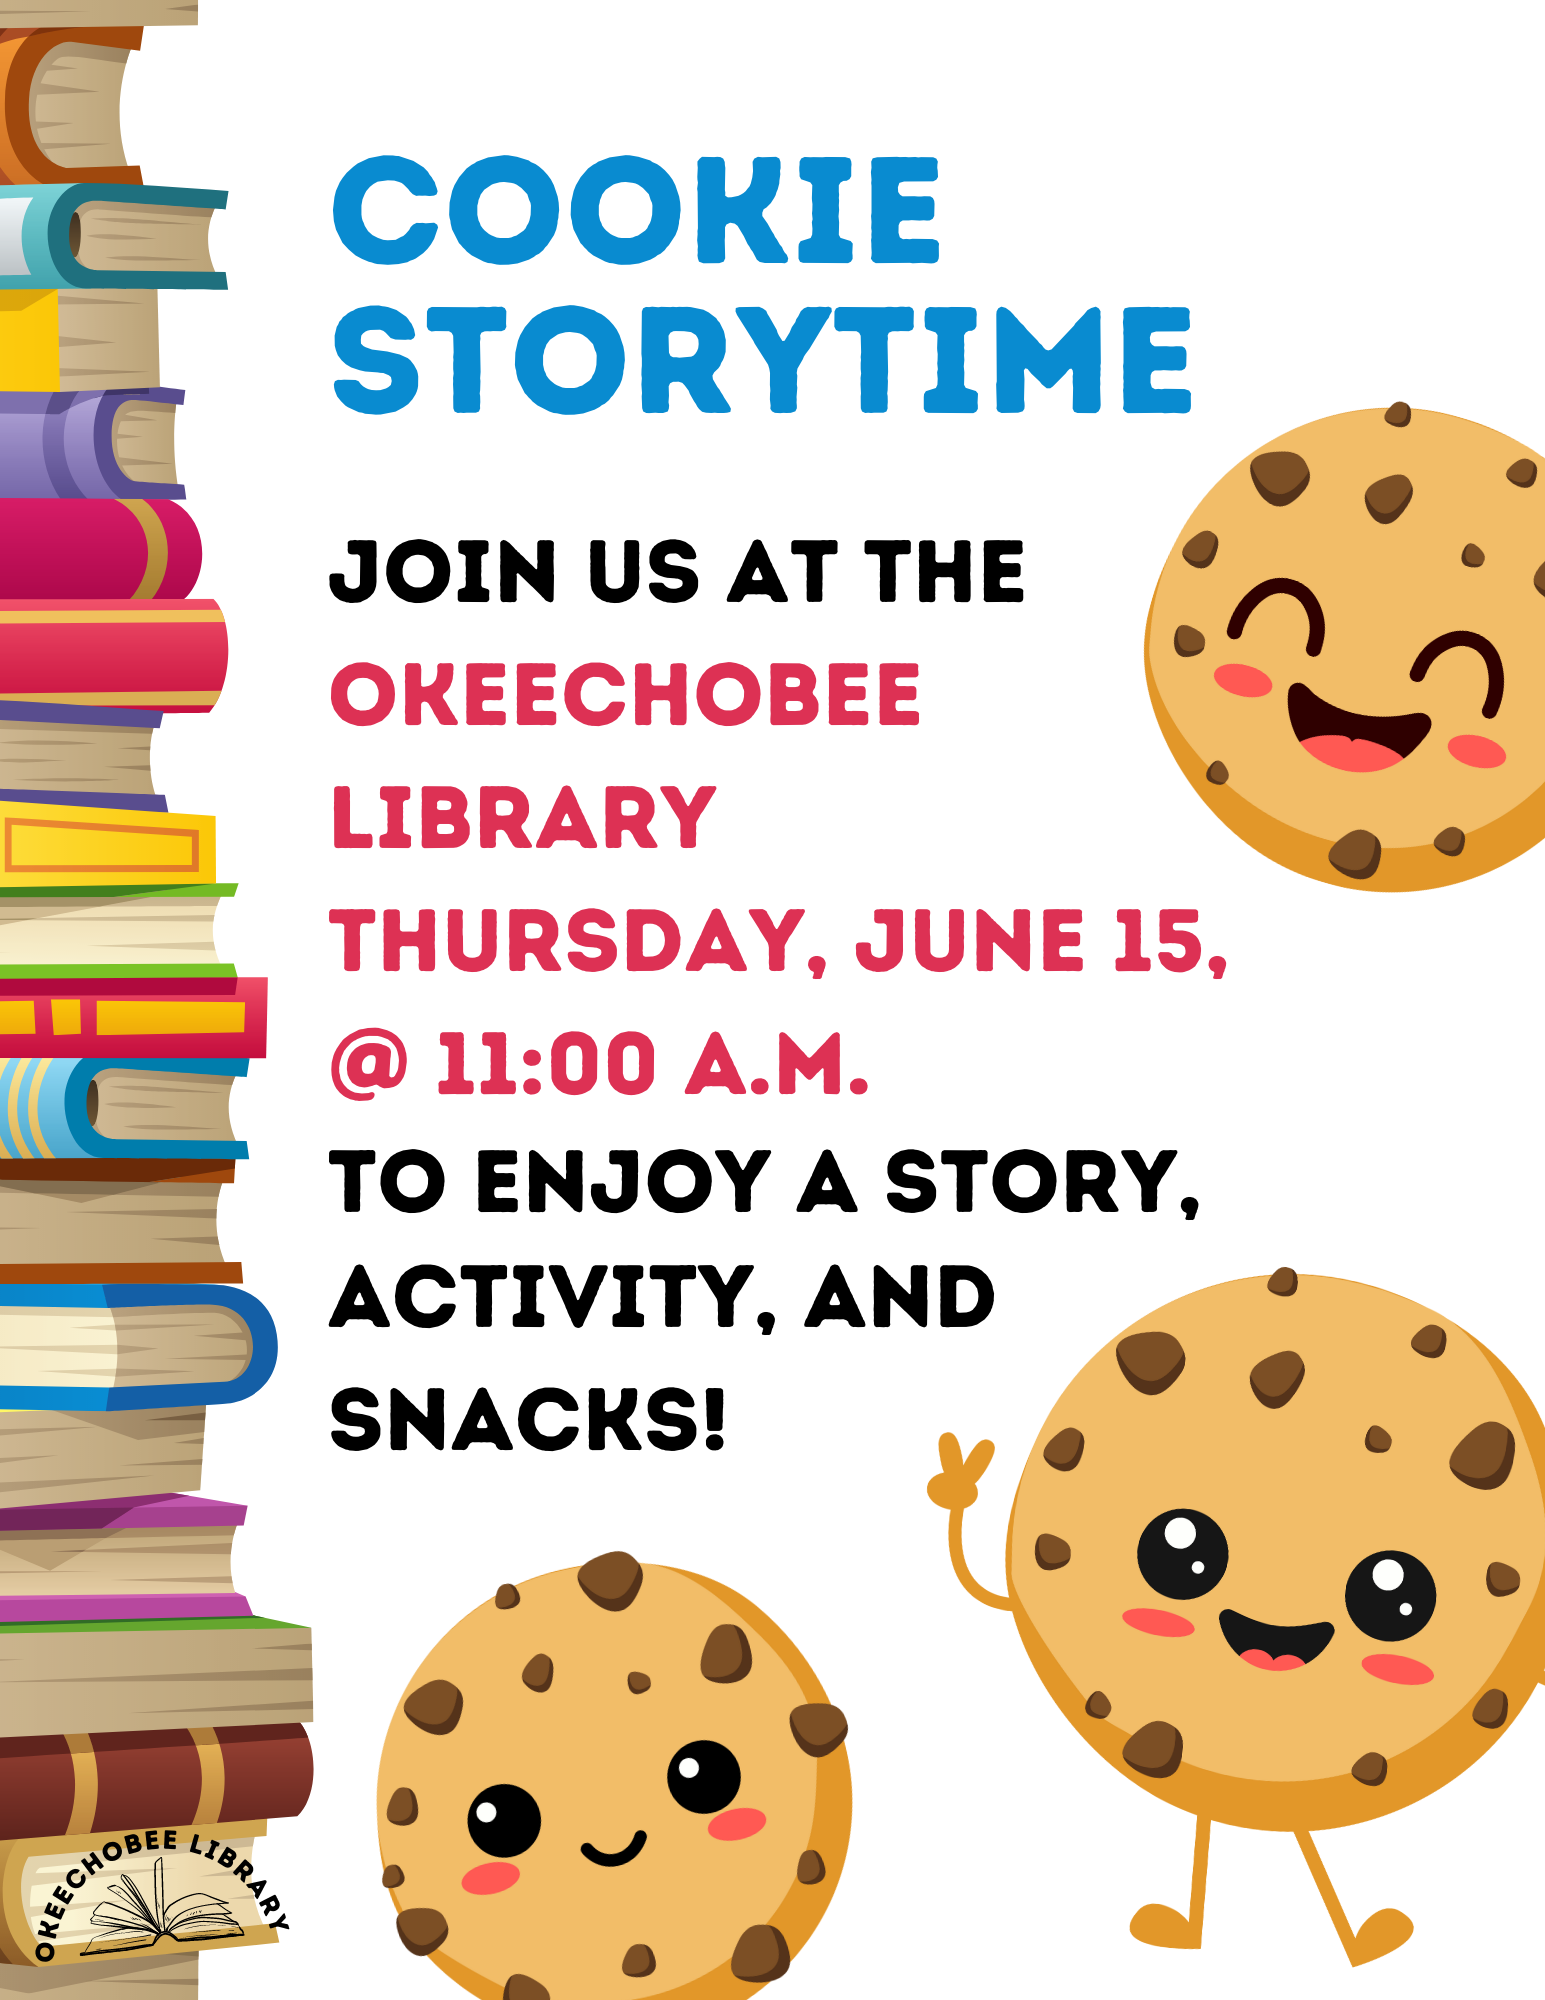 Join us at the Okeechobee Library on June 15th at 11:00 A.M. for our Cookie Story Time!